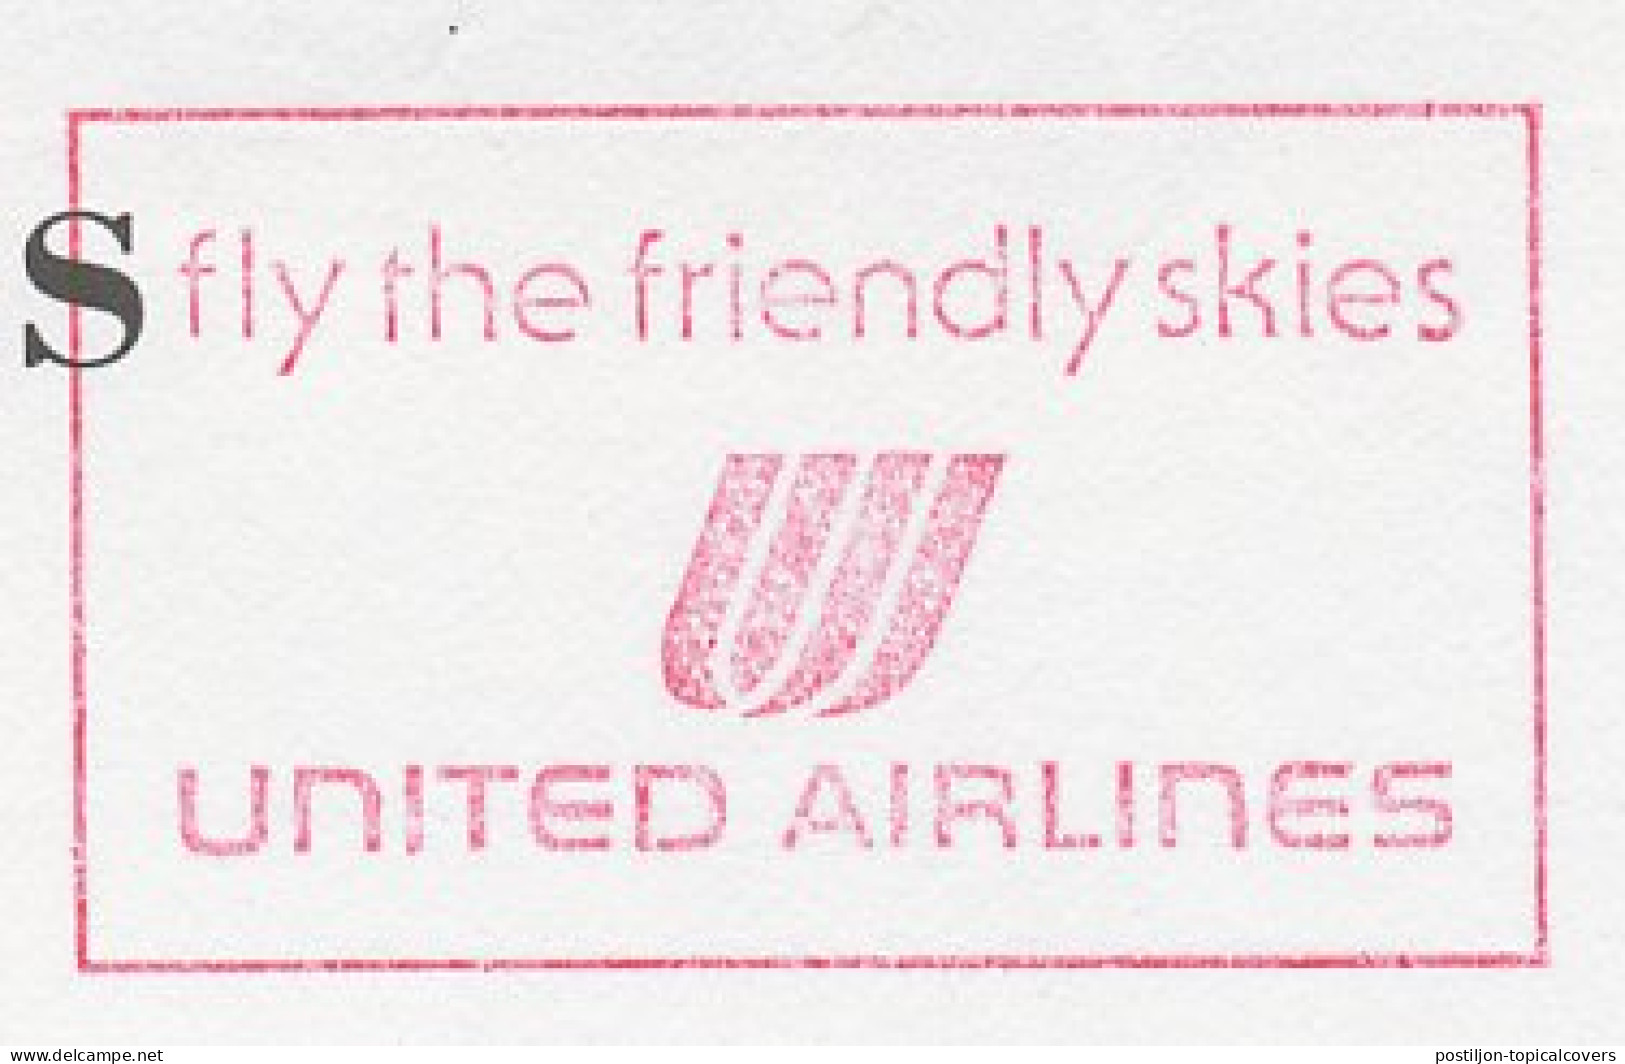 Meter Top Cut Netherlands 1994 United Airlines - Airplanes